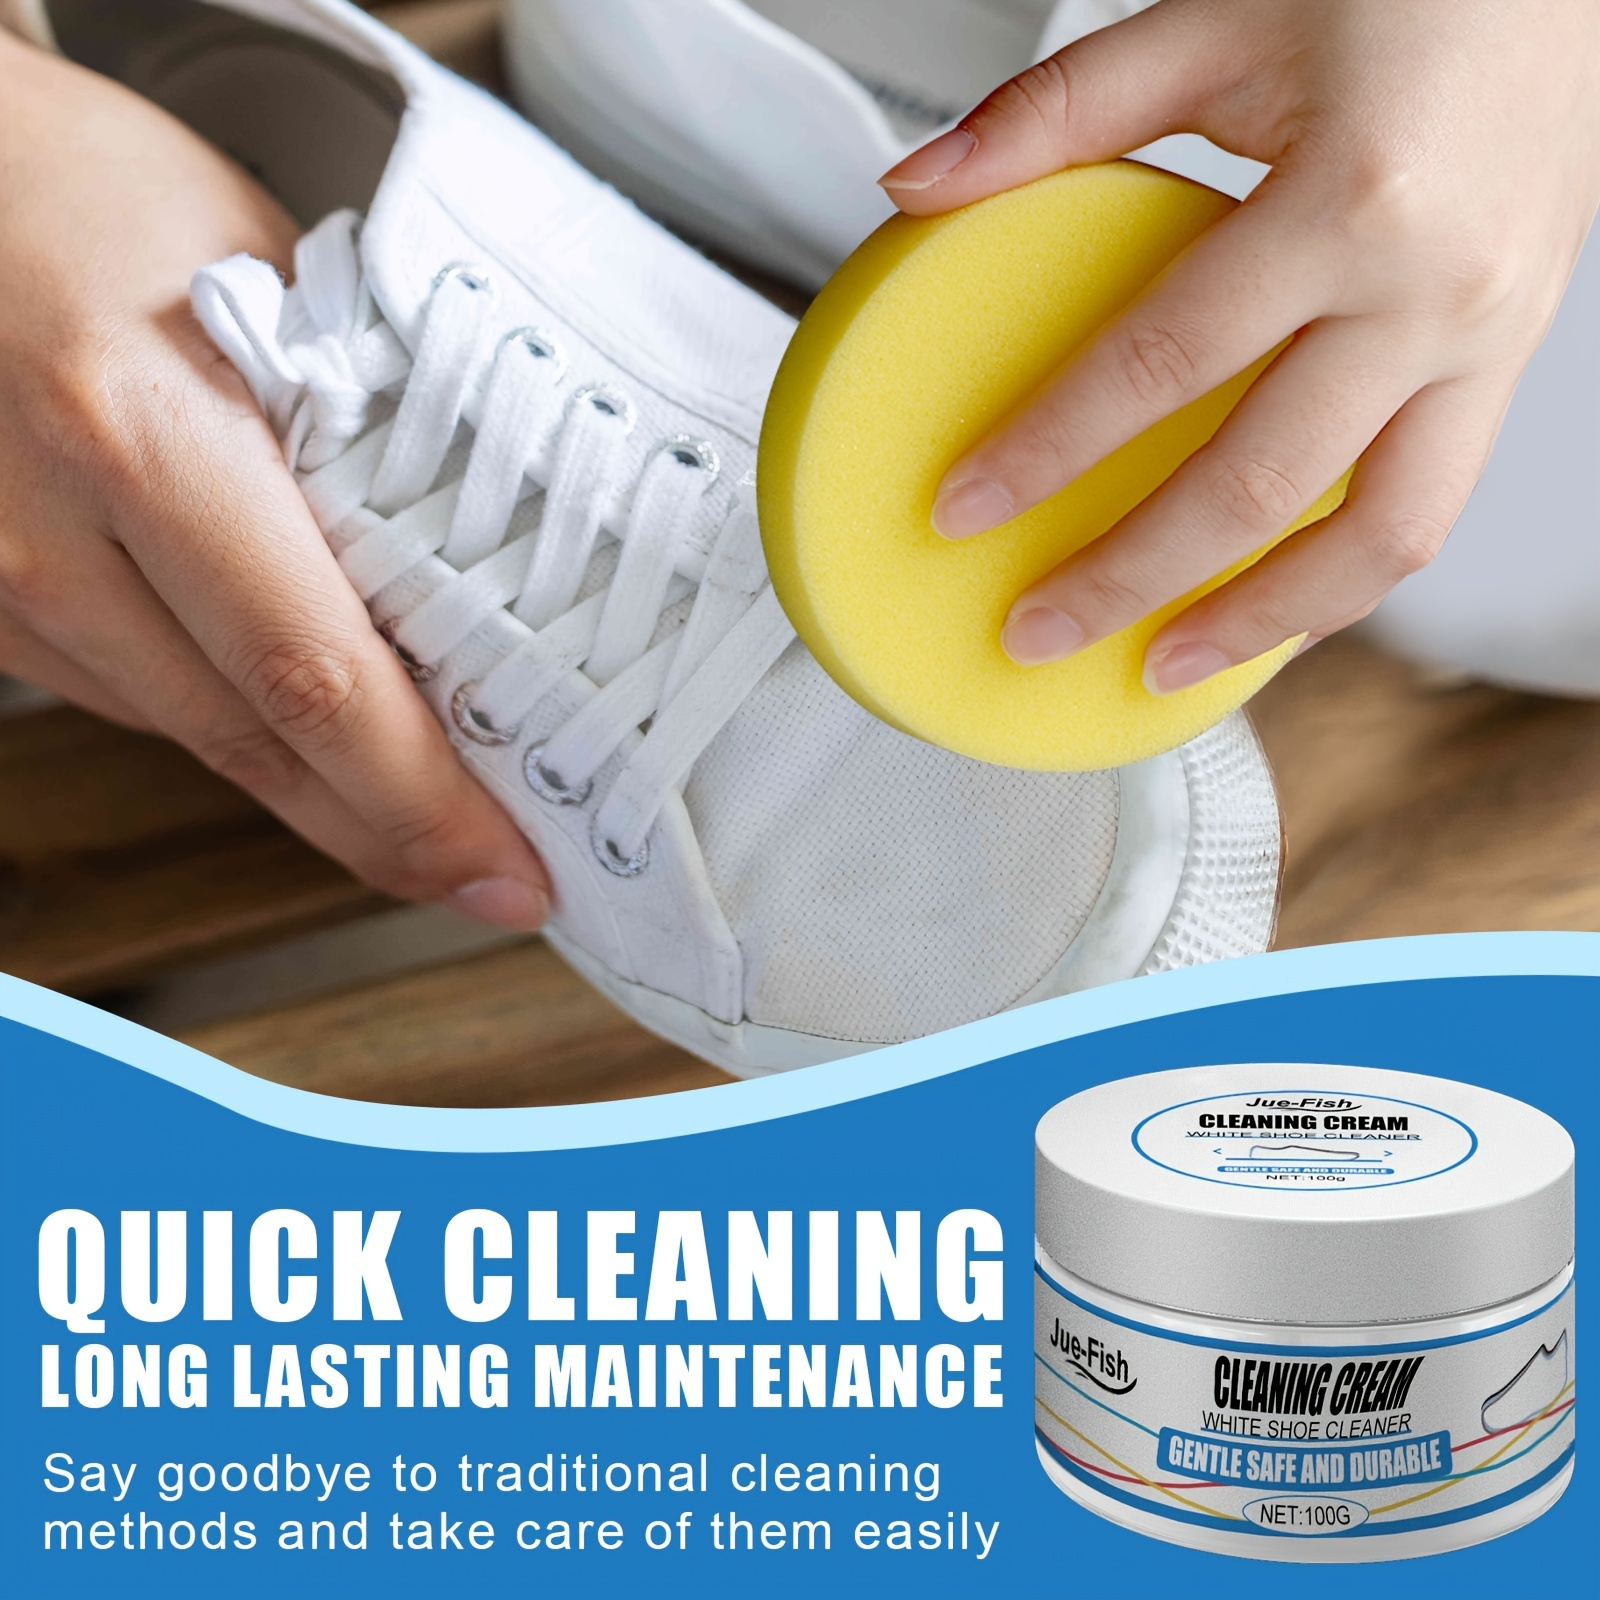 TKG traders White Shoe Cleaning Cream,Polish Smooth Leather Shoes &  Boots,Sneaker Cleaner White Shoes, White Rubber Sole Shoe Cleaner